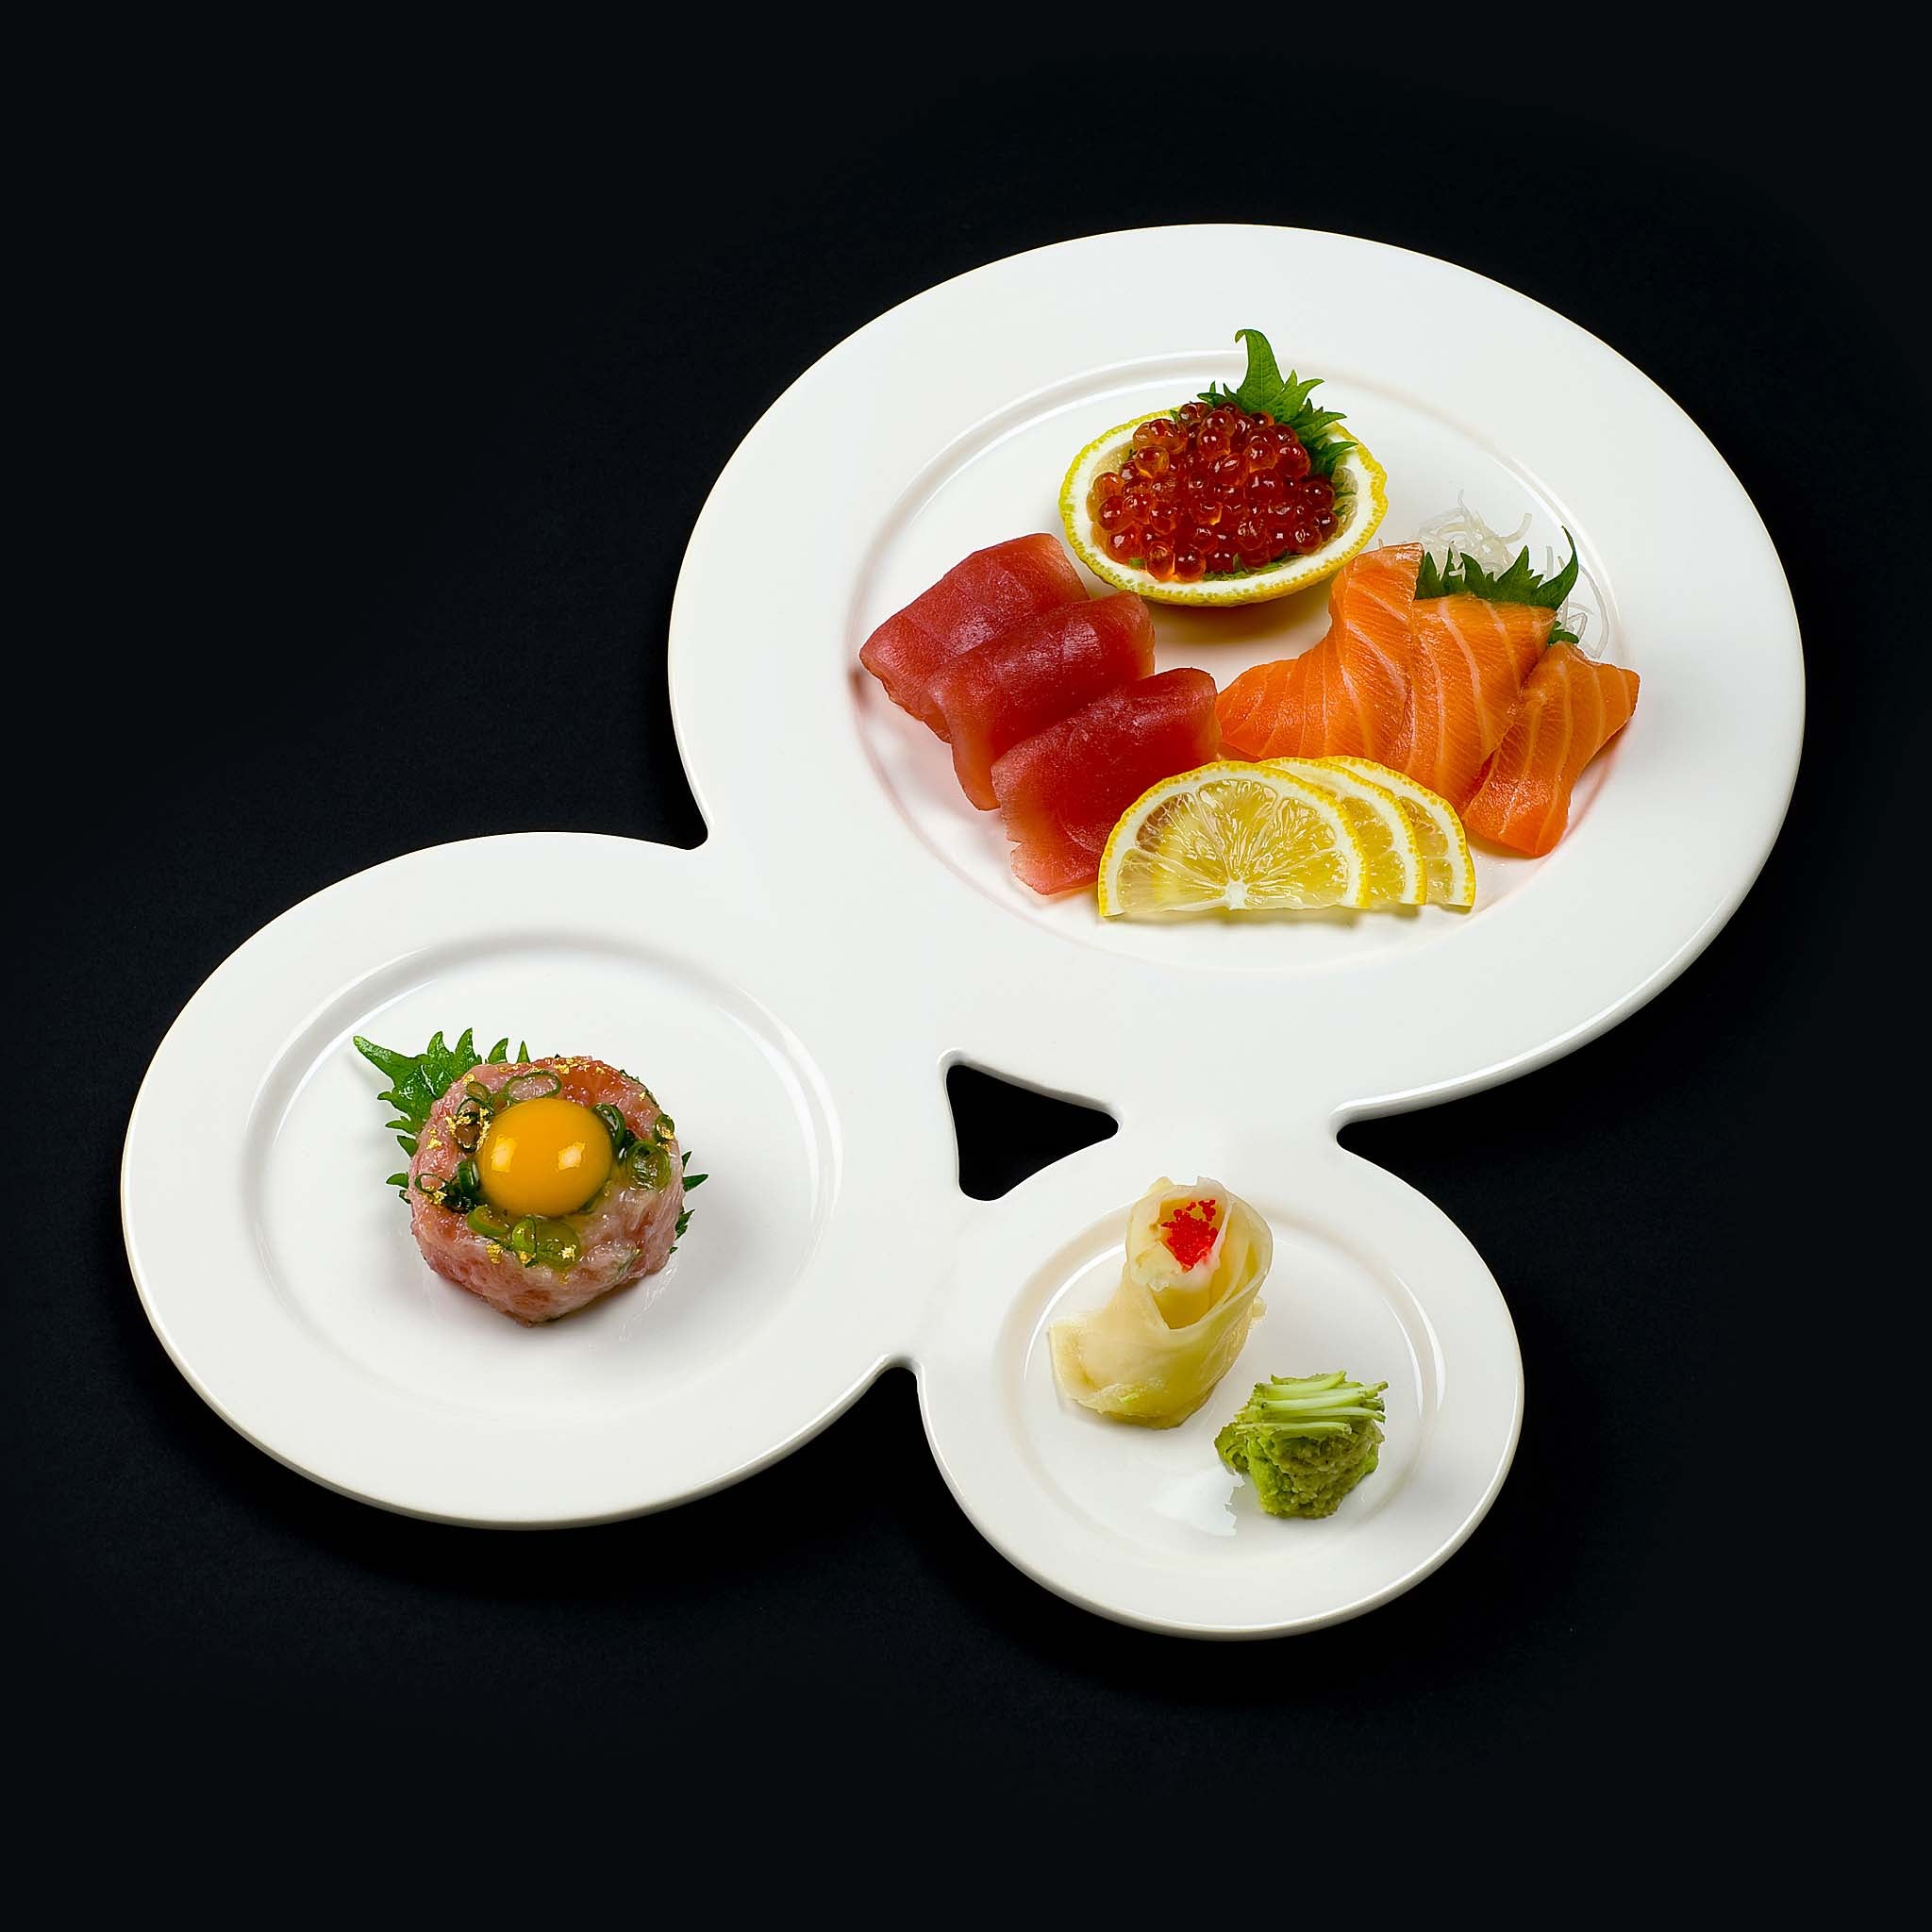 Gourmet Trio Plate is a serving platter composed of three porcelain plates of different sizes. The plates appear joined together to form a whole, creating a new tableware concept. The range of sizes suggests different ways to appreciate the courses of a meal.